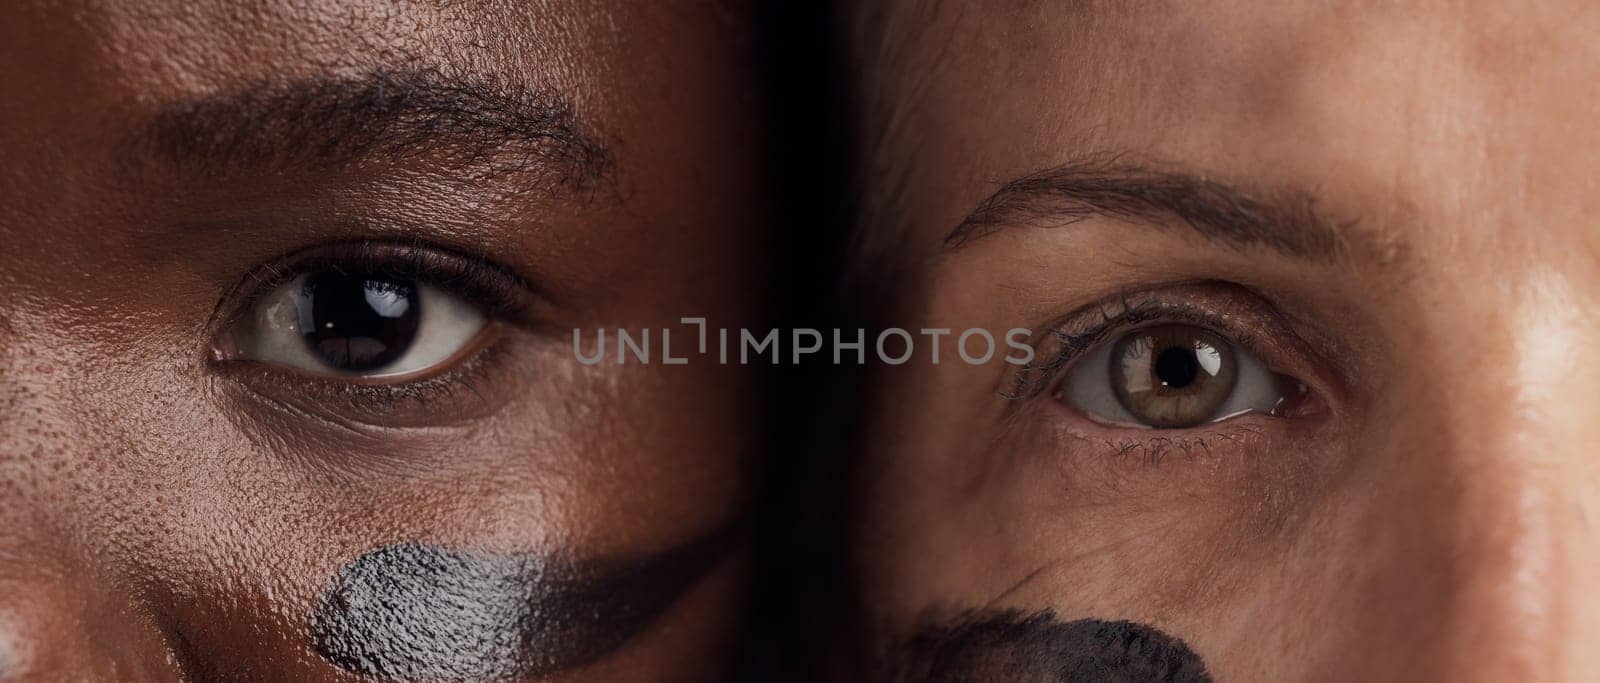 Eyes, diversity and empowerment with women closeup in studio for human rights or gender equality. Portrait, face and courage with confident female people in a politics protest of violence together.